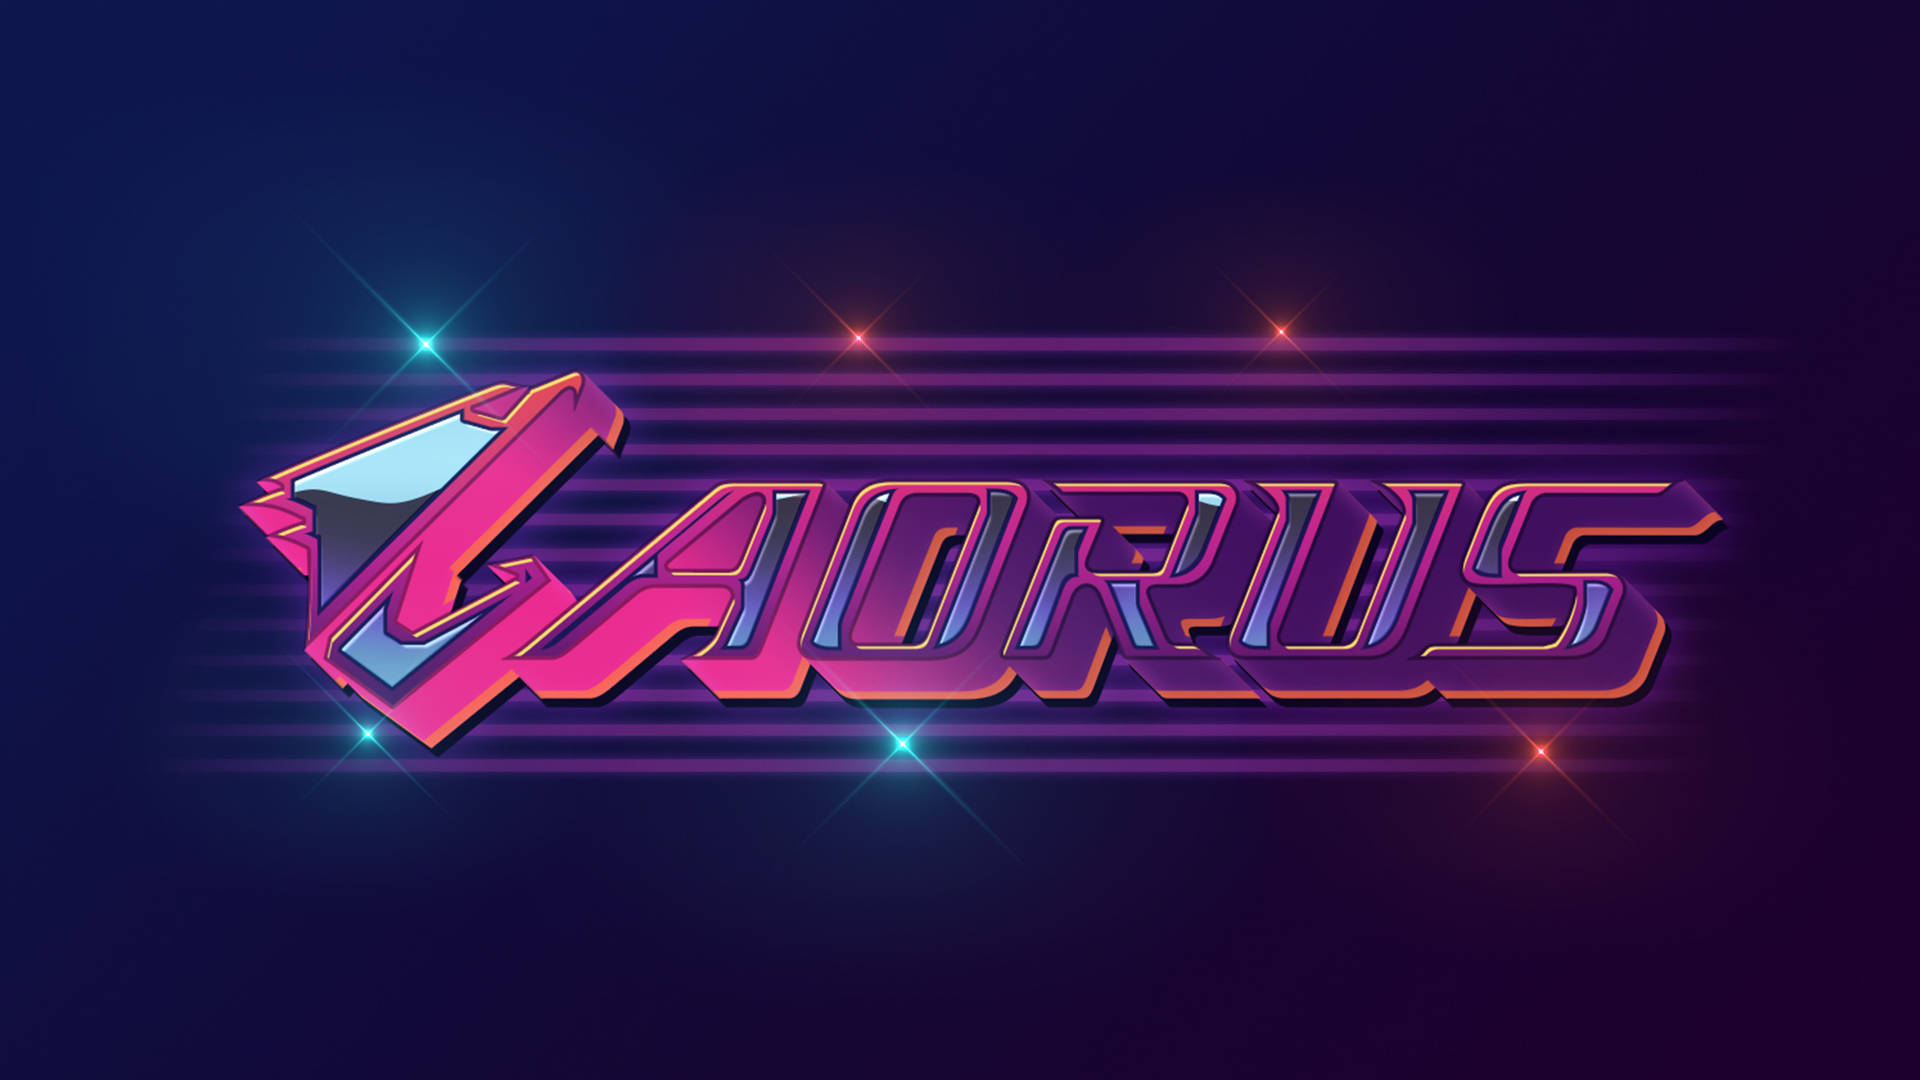 A Retro Styled Logo With The Word Adrius Wallpaper